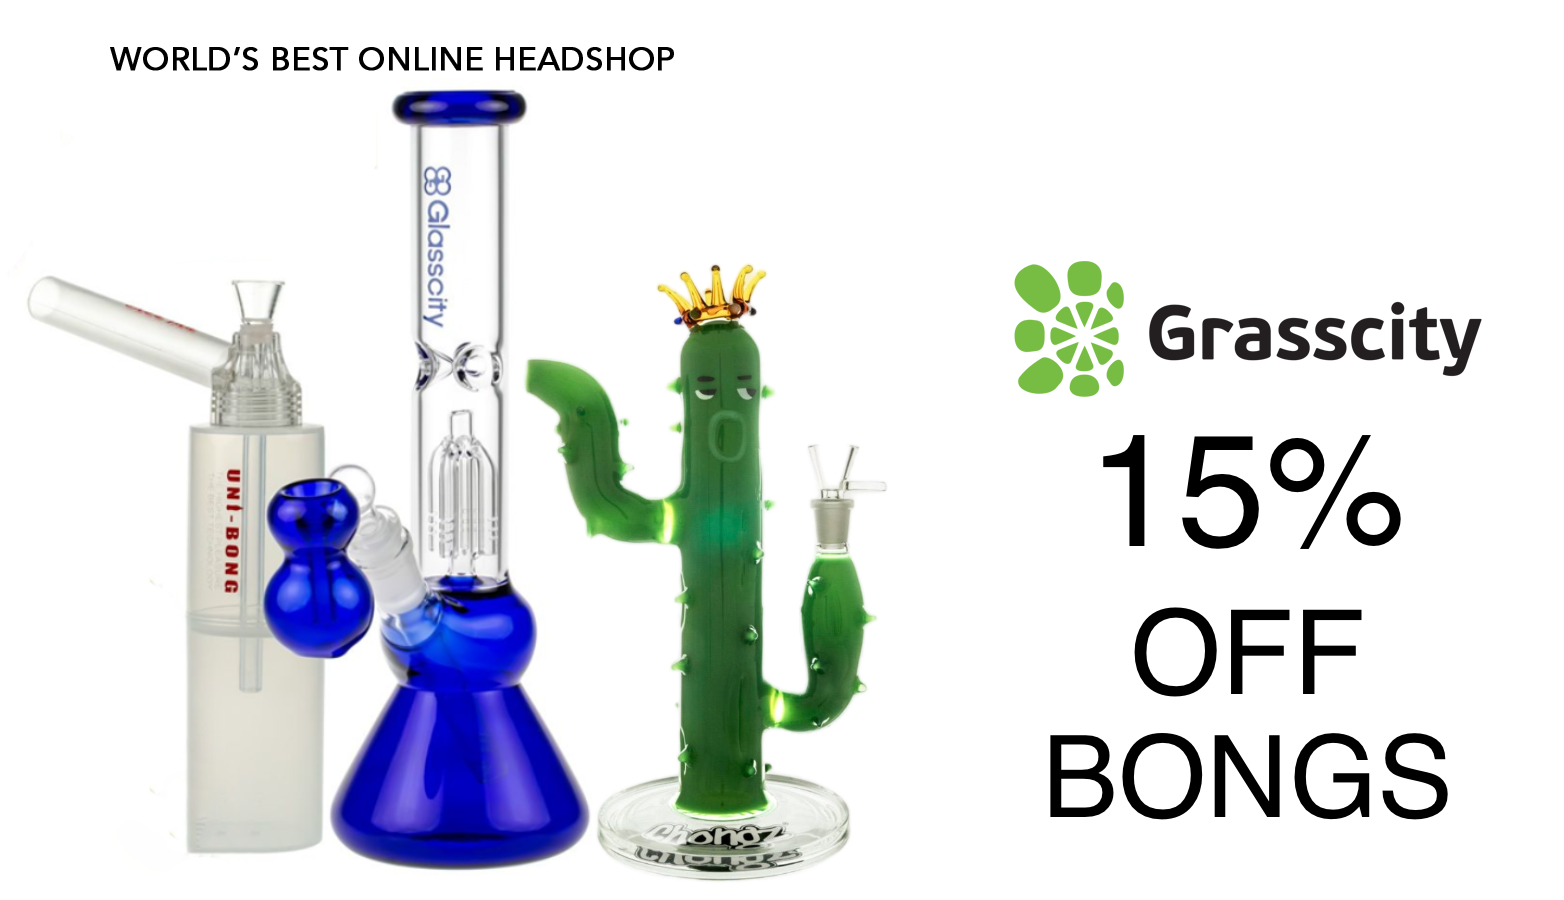 Grasscity Coupon Code - Bongs Discount - Save On Cannabis